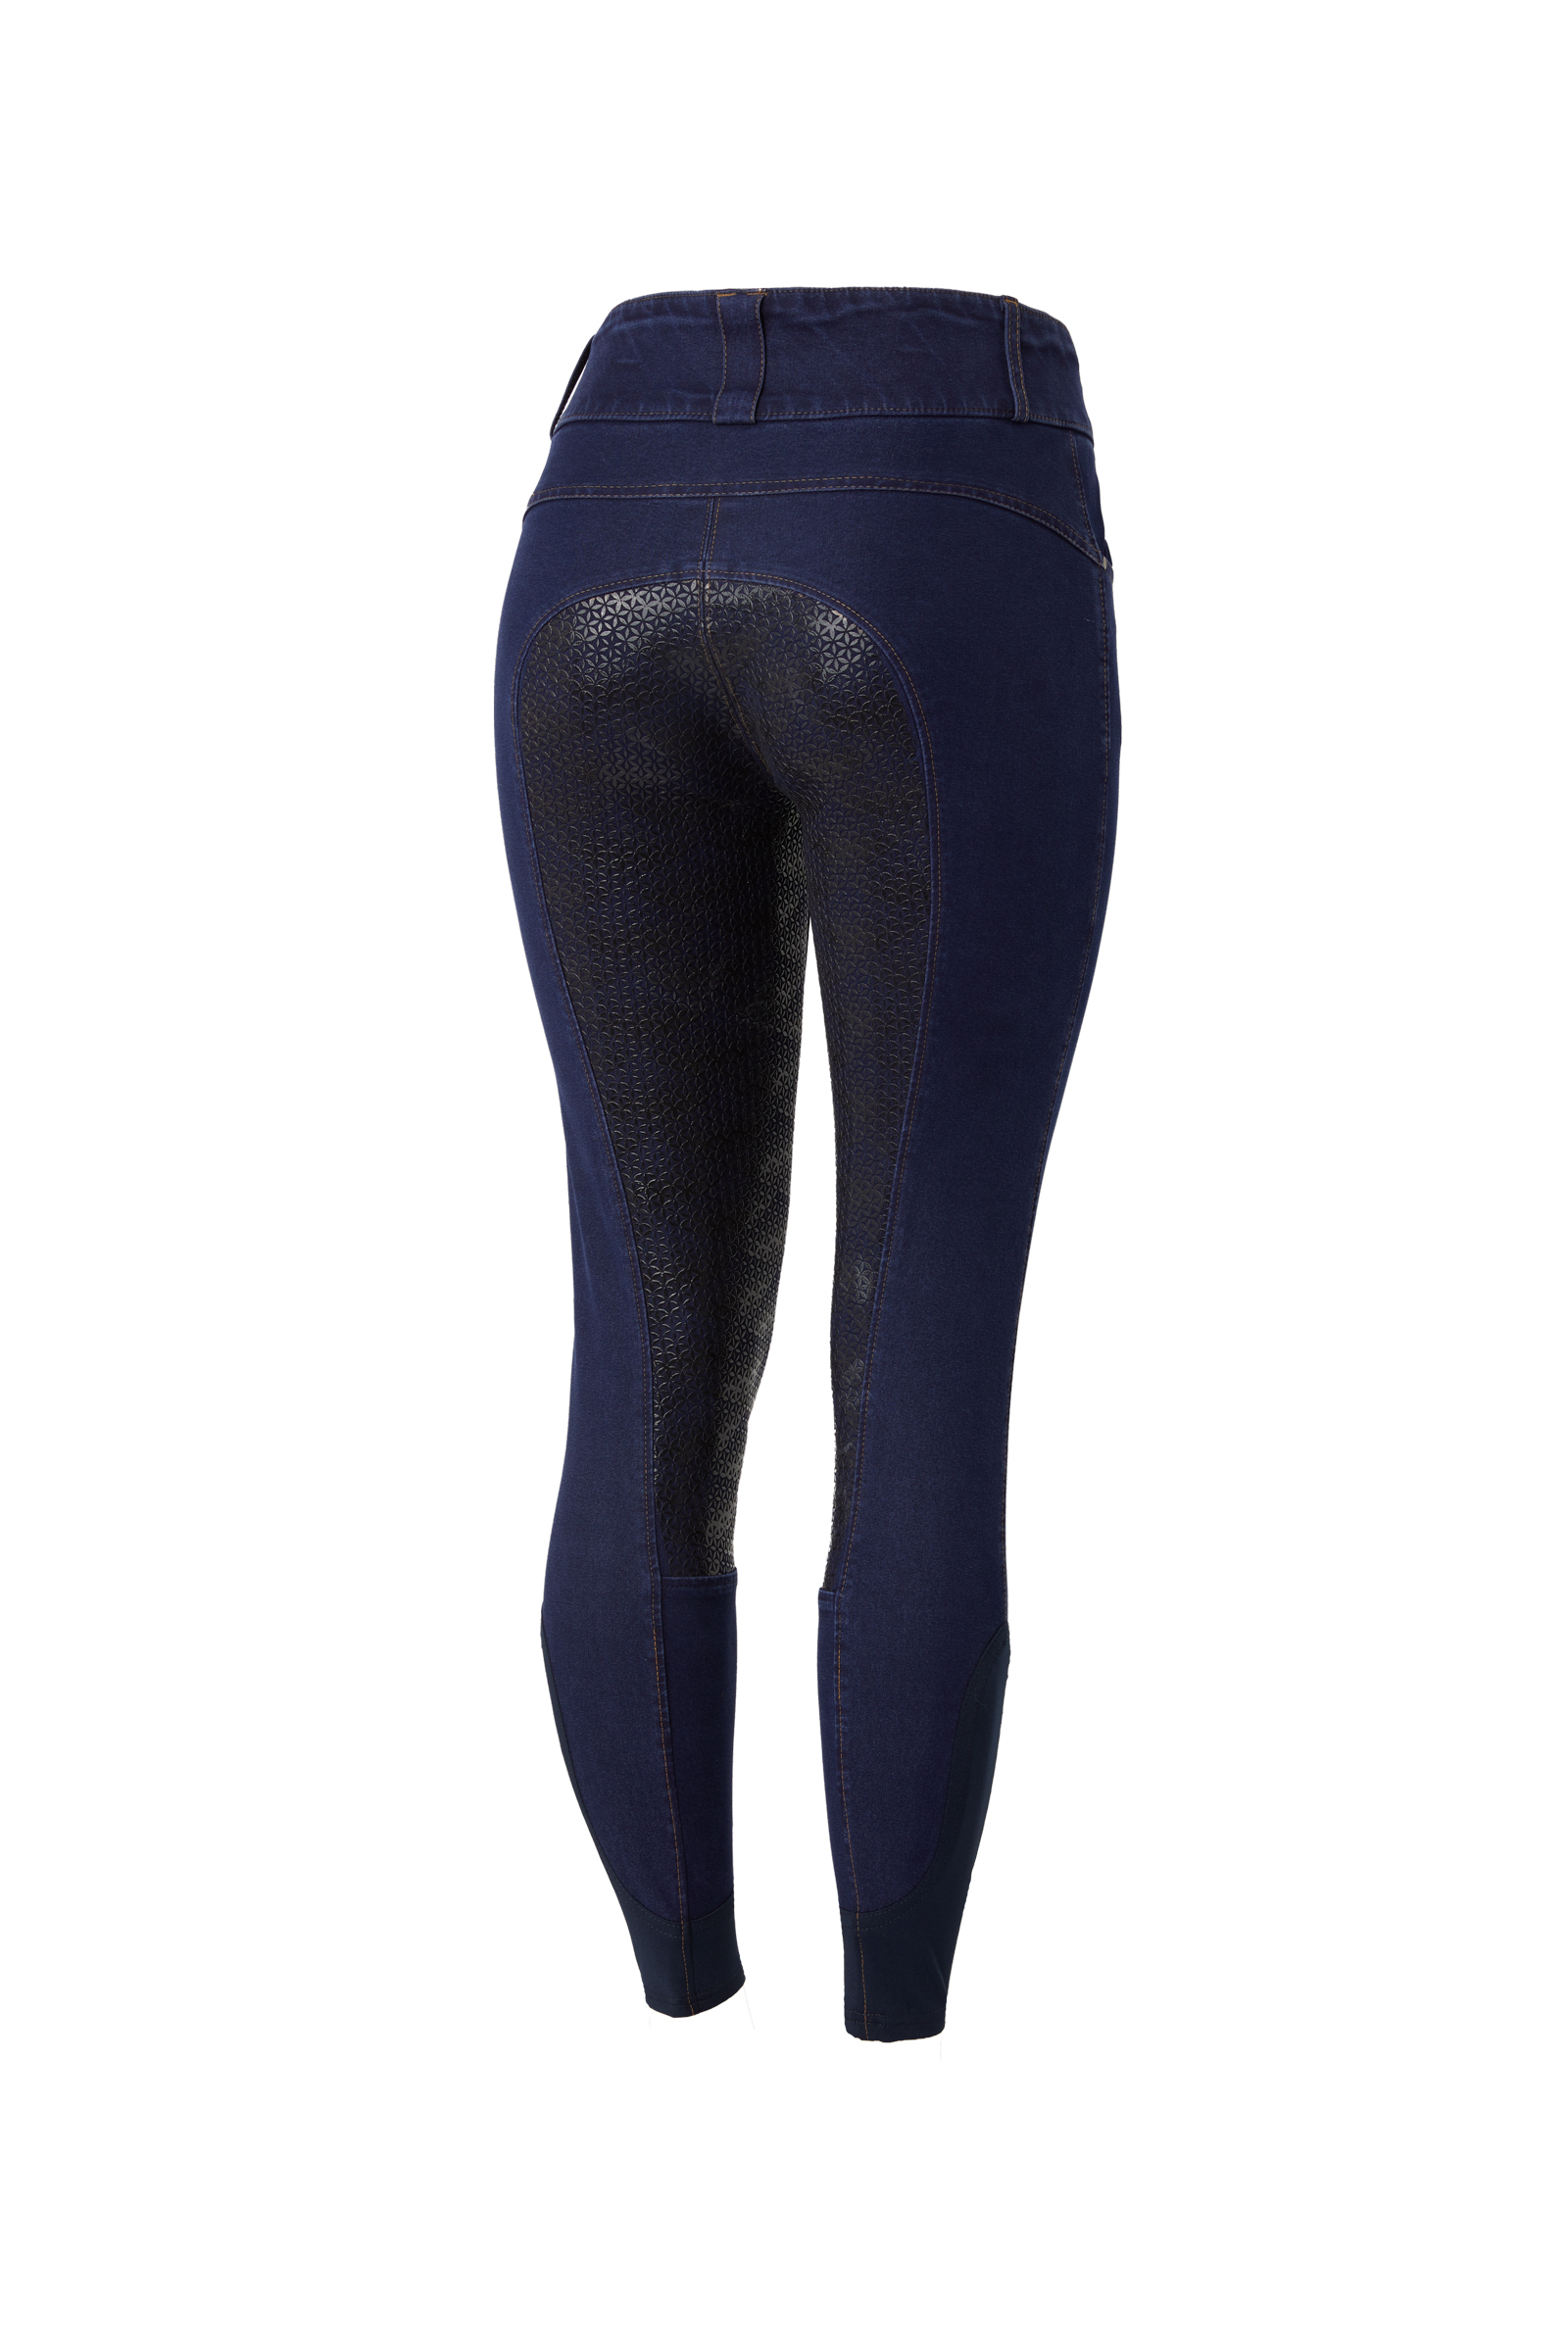 Horze Women's Active Full Seat Breeches - Marsala Red - Horze-36277-MSRE -  Tack Of The Day